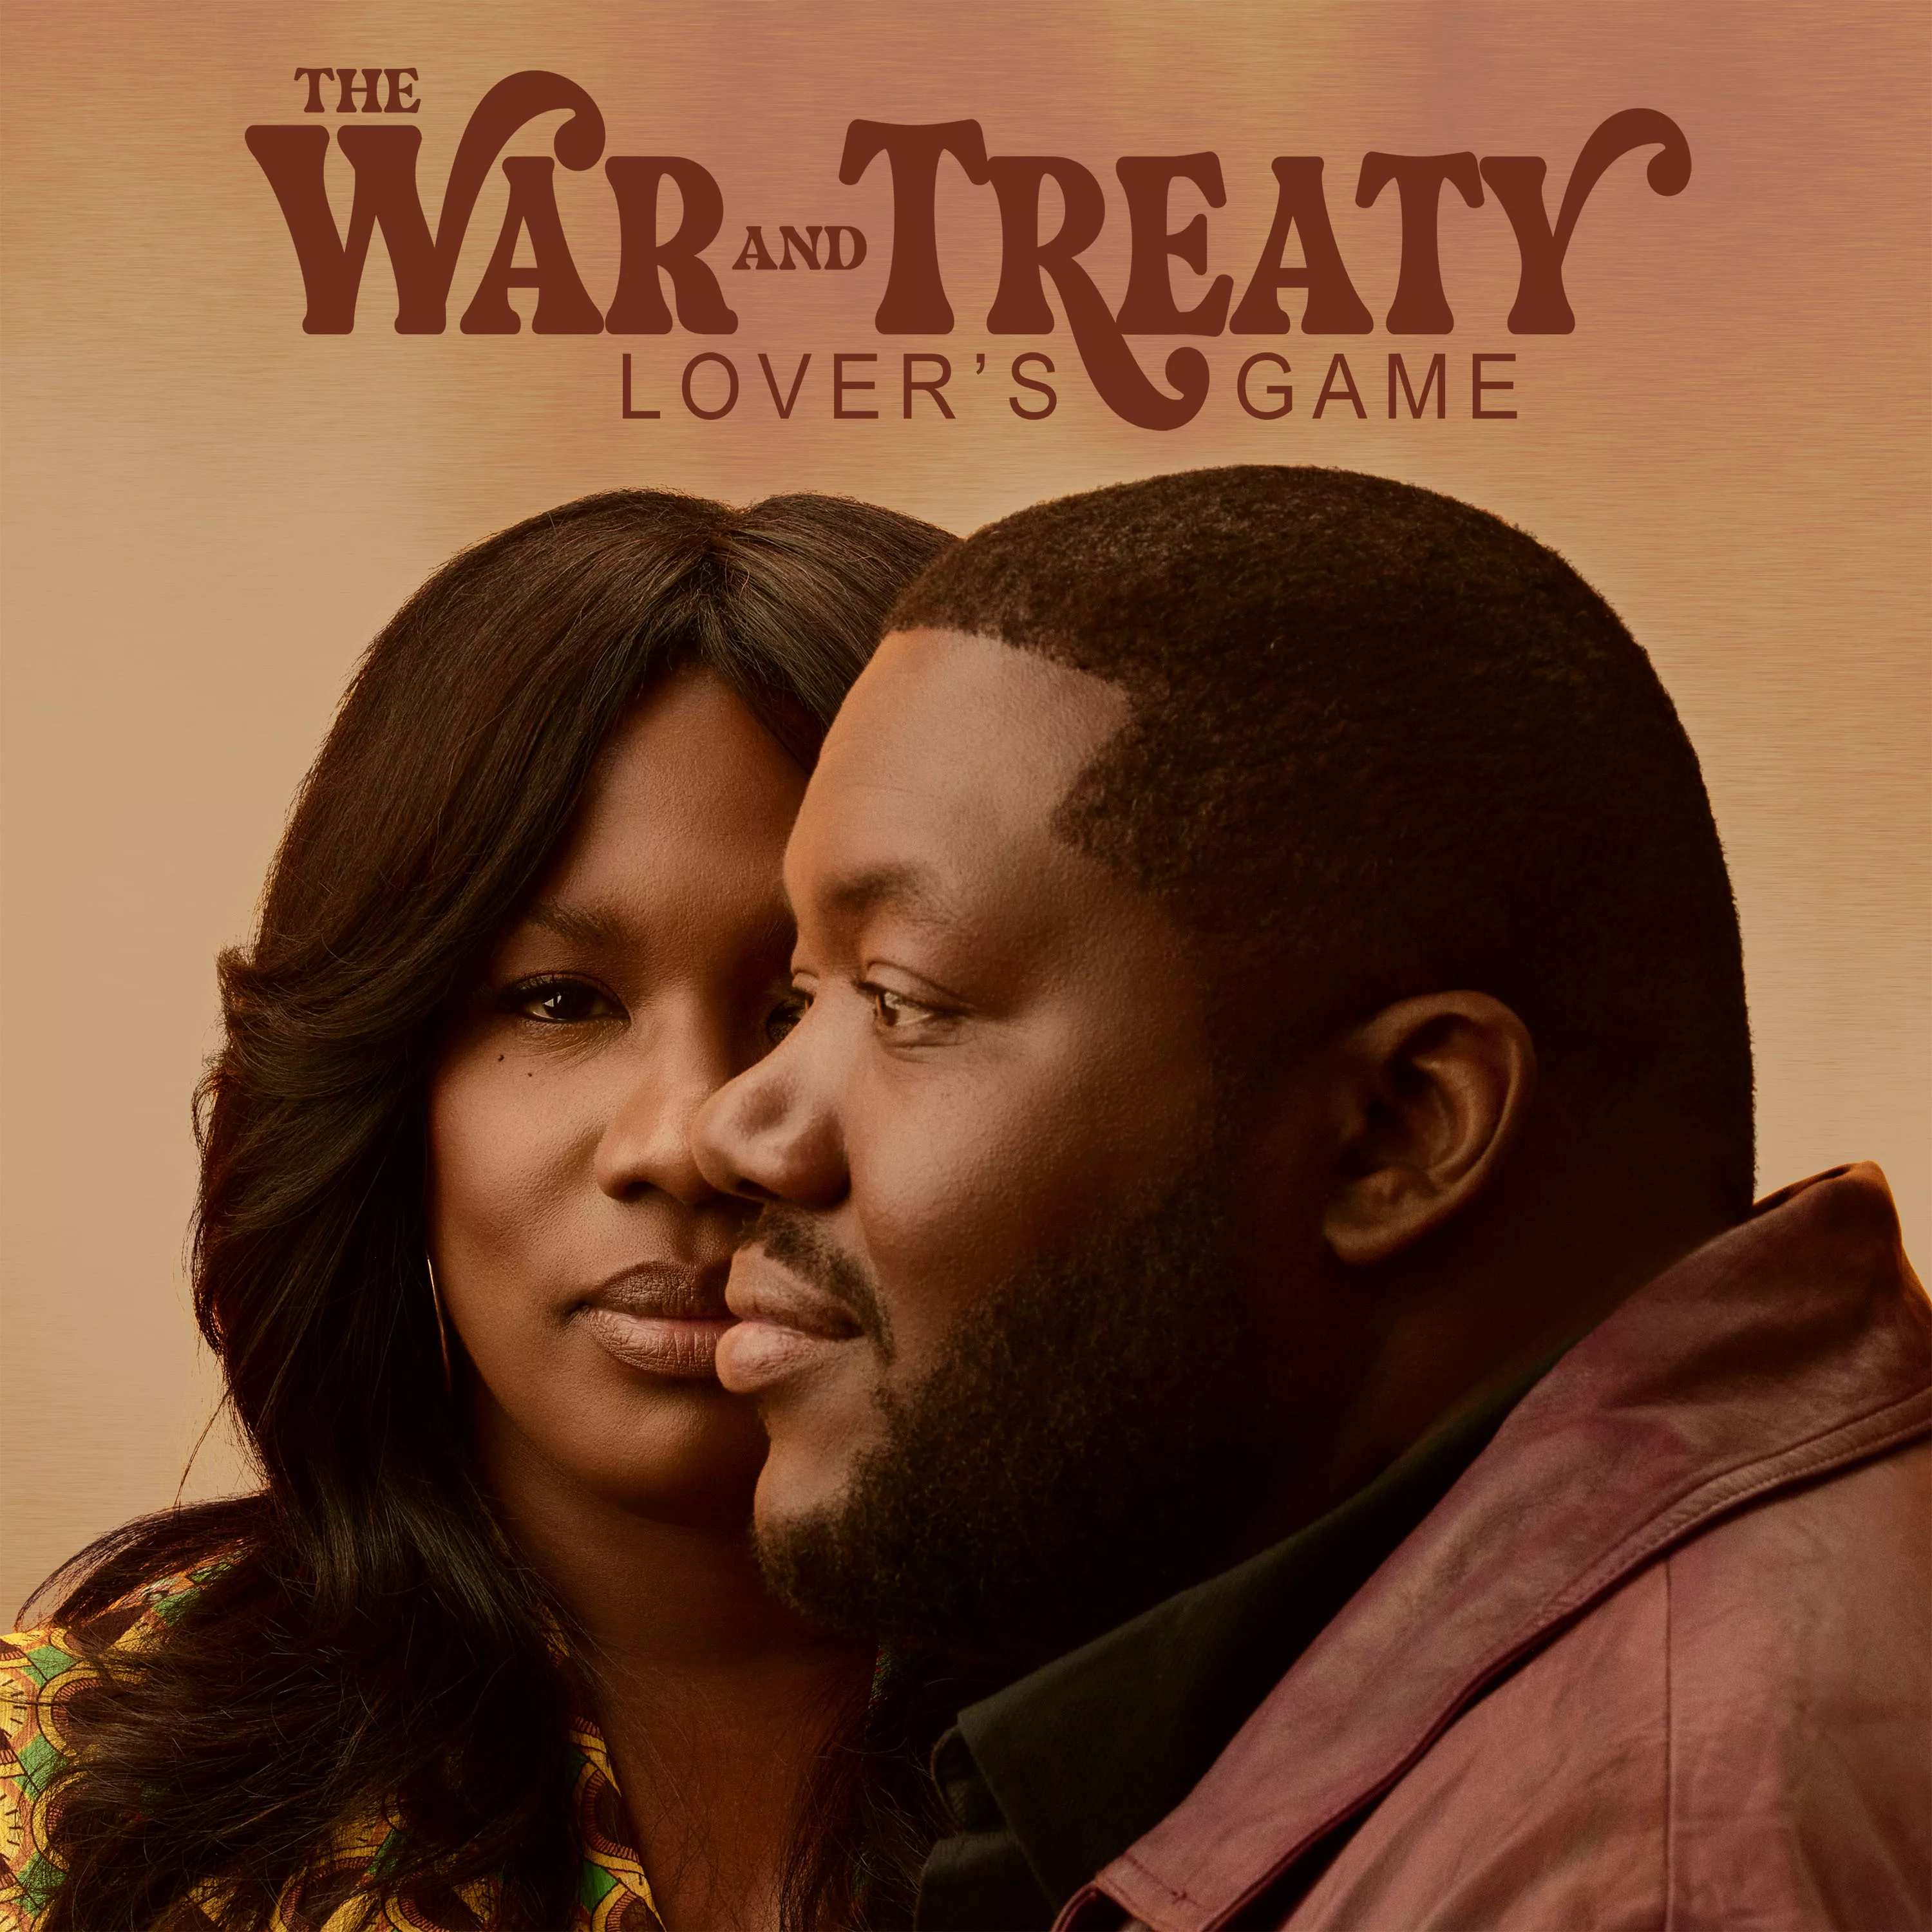 Lover’s Game - The War and Treaty